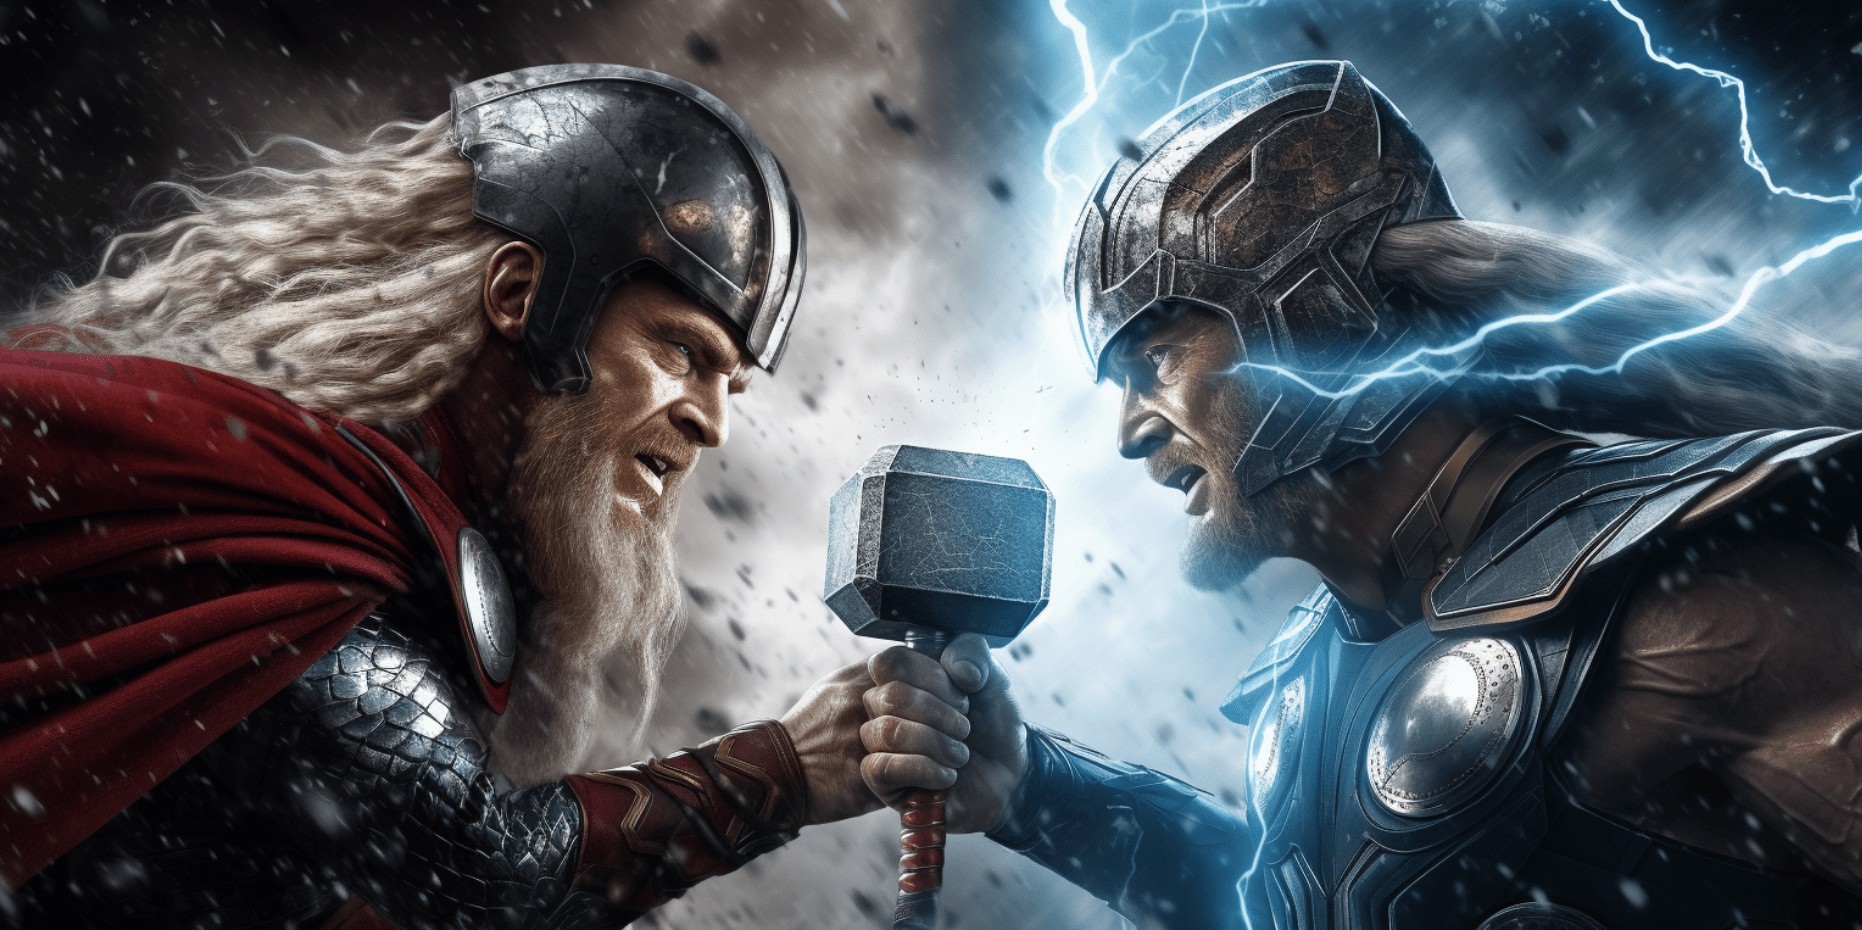 How Record of Ragnarok Turns Thor and Mjolnir Into Villains